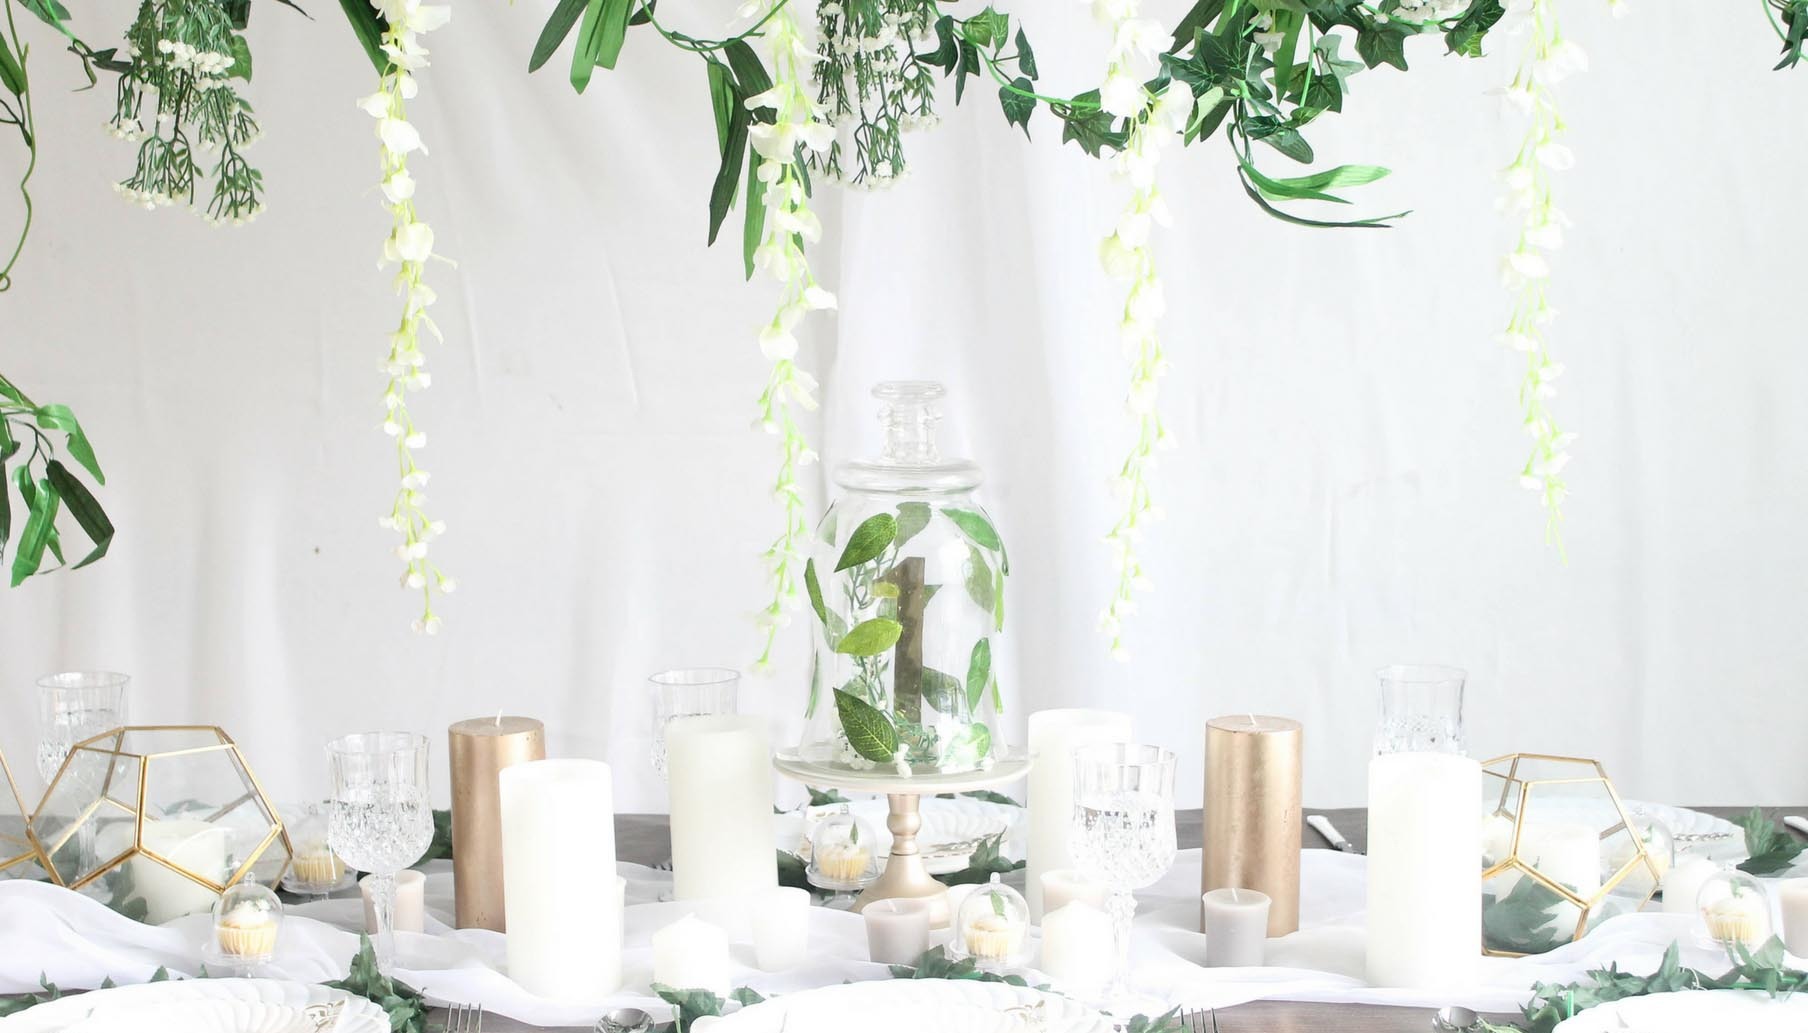 Reception table setting details - Black tablecloth, white candles, black  birdcage with white and green floral arrangement